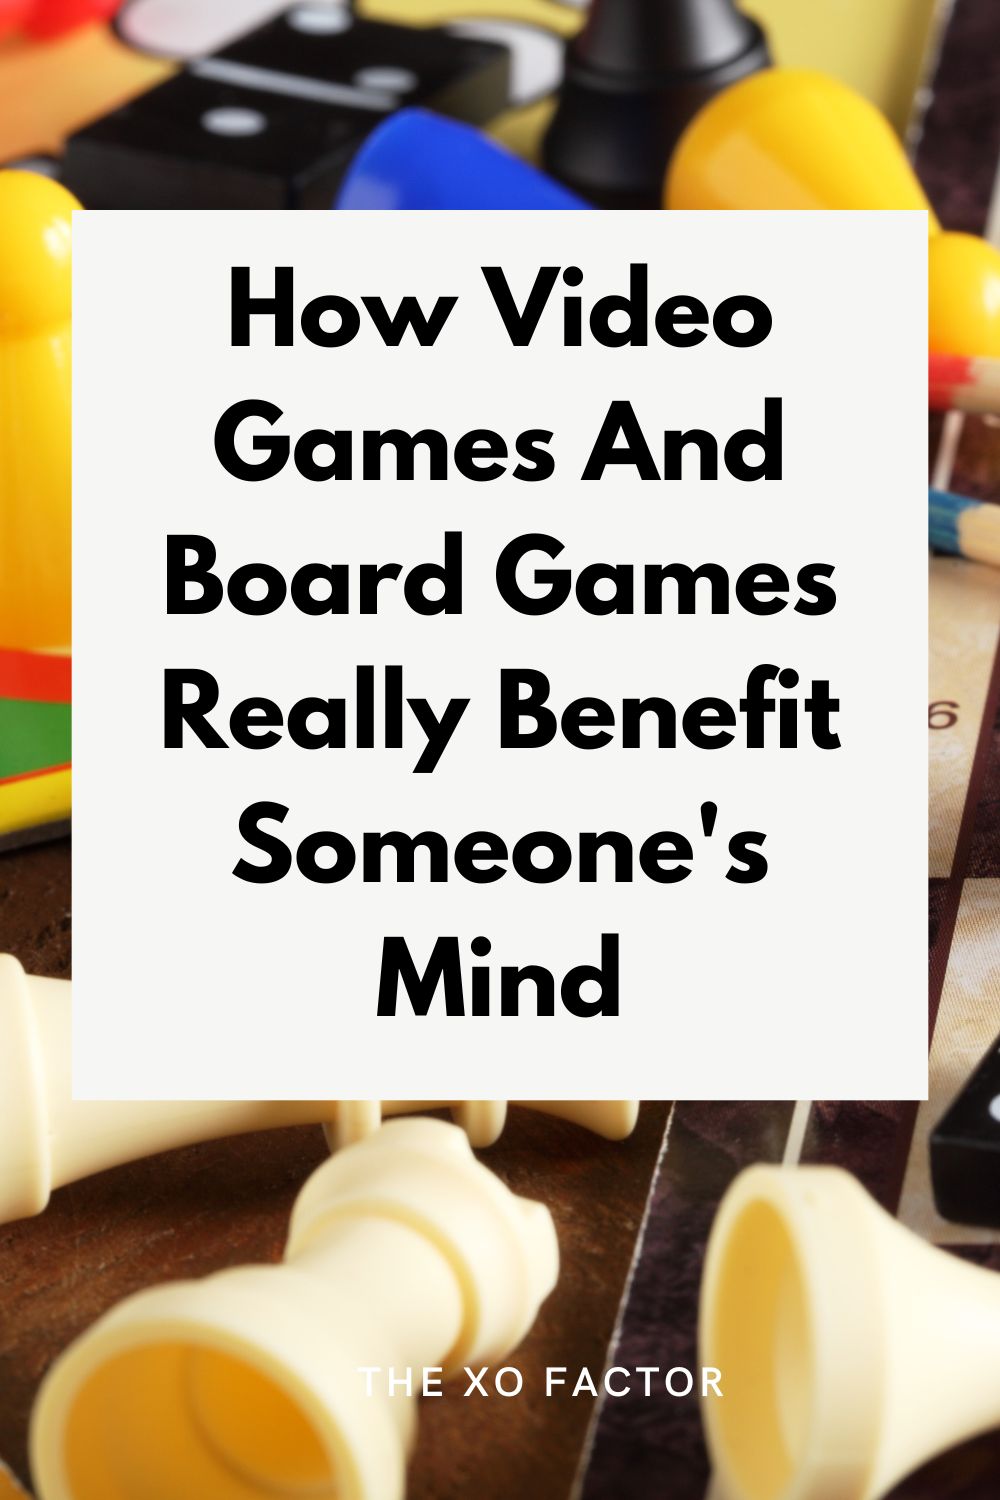 How Video Games And Board Games Really Benefit Someone's Mind